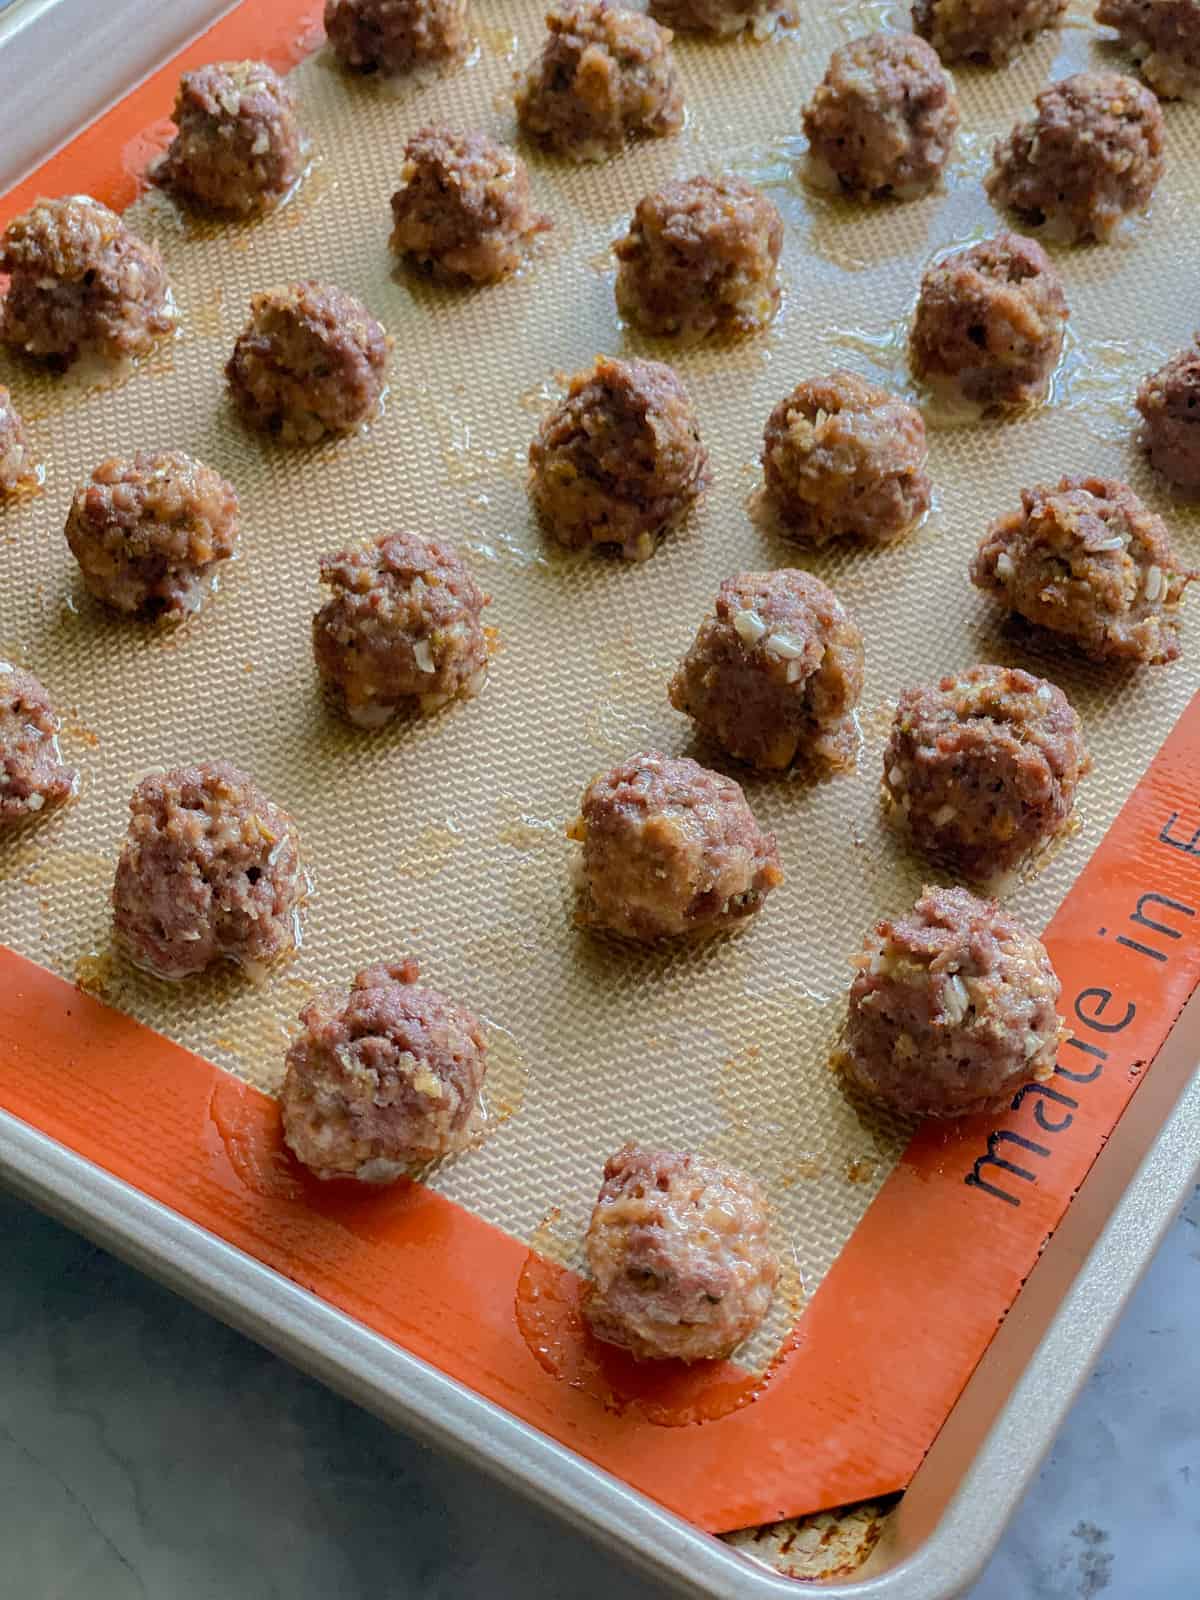 Cooked meatballs on baking sheet.